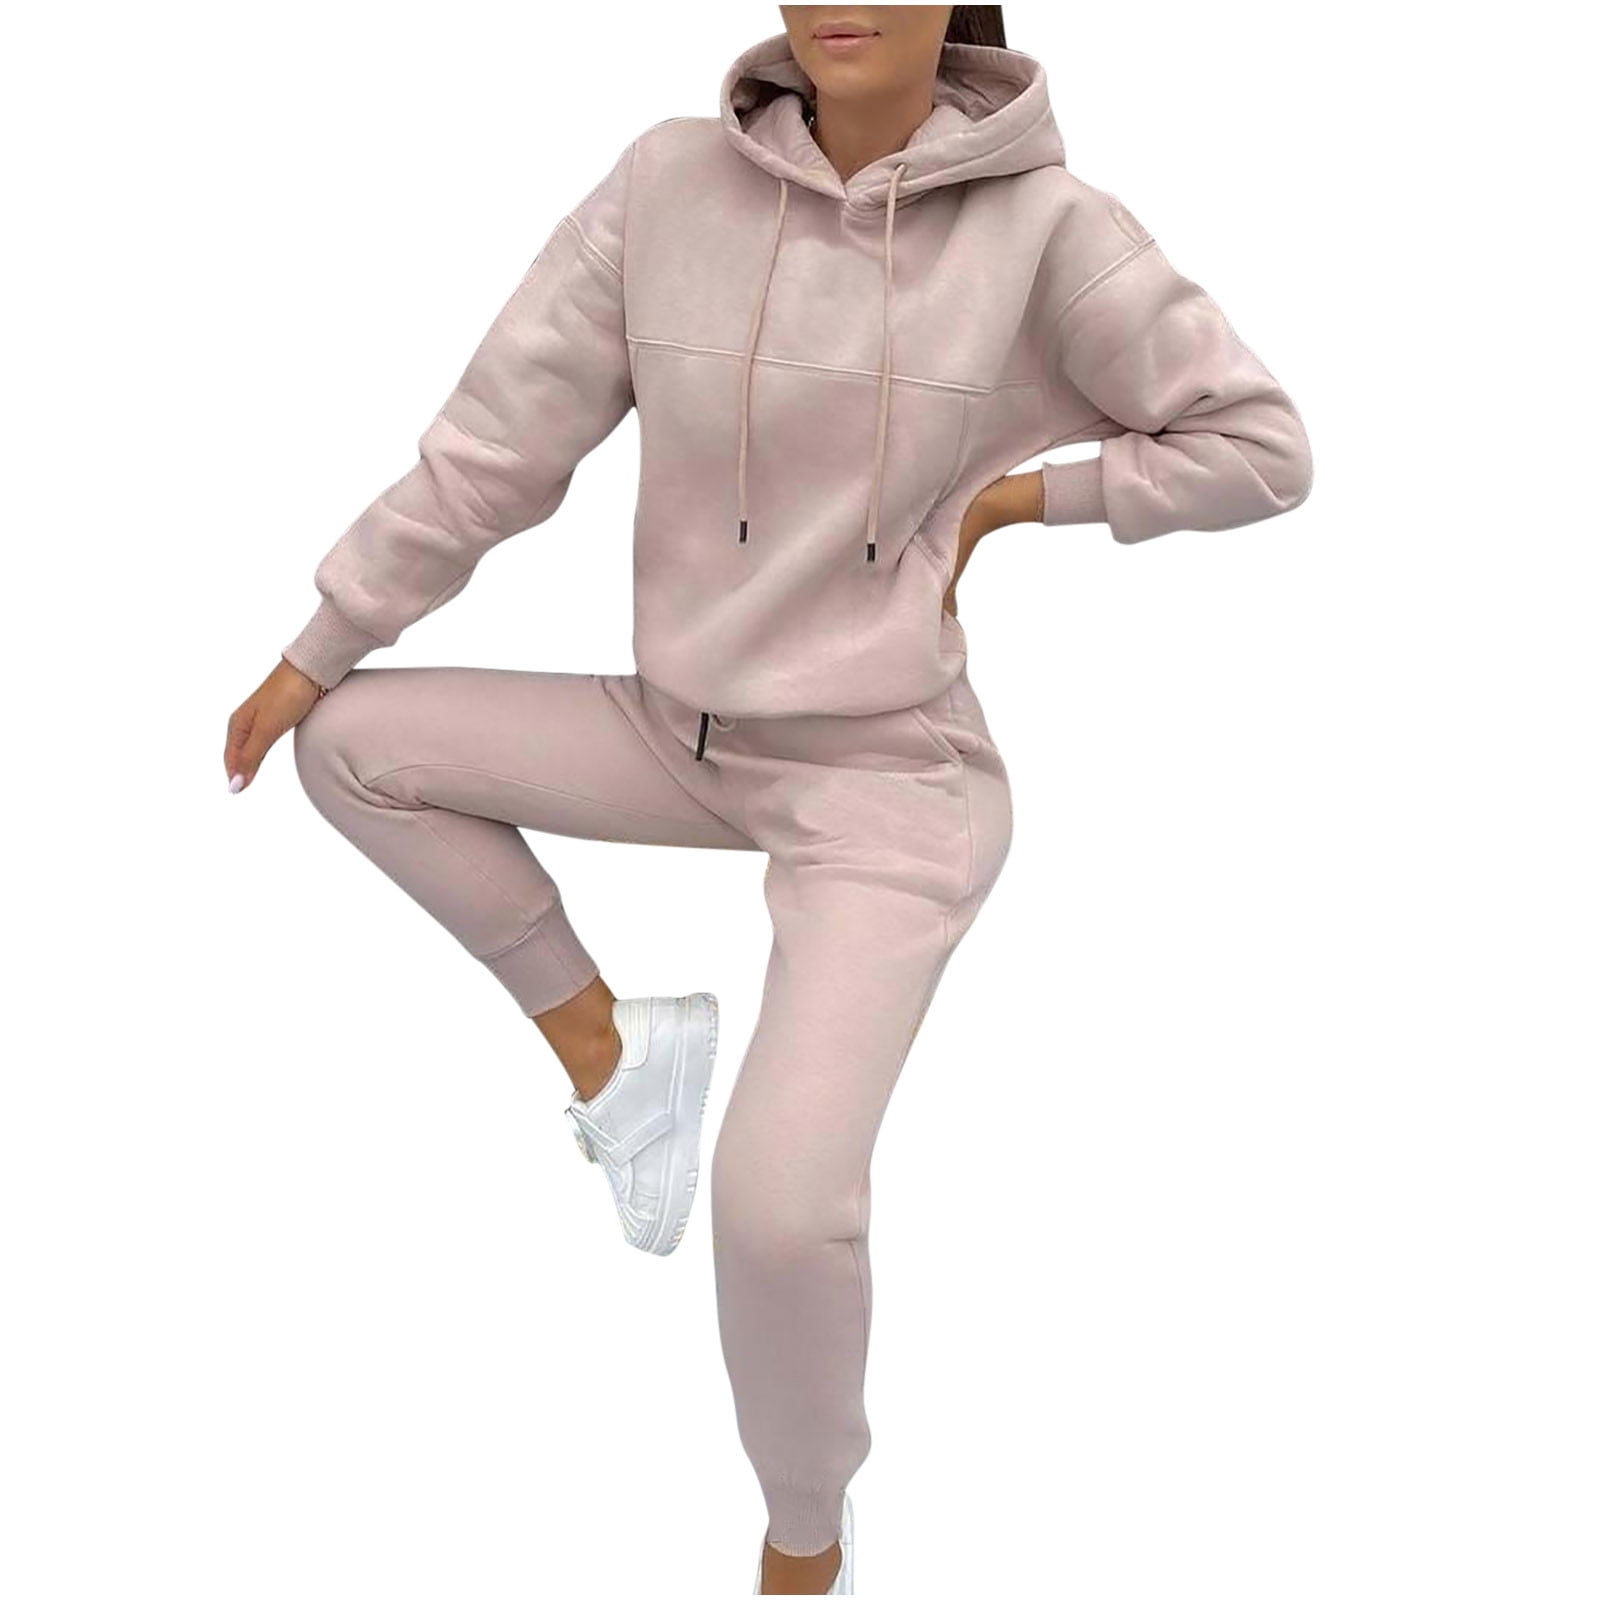 Women Hoodies Sweatsuit Long Sleeve Hooded Matching Joggers Sweatpants 2  Piece Tracksuit Sets Fall Winter Warm Jumpsuits Outfits Set 